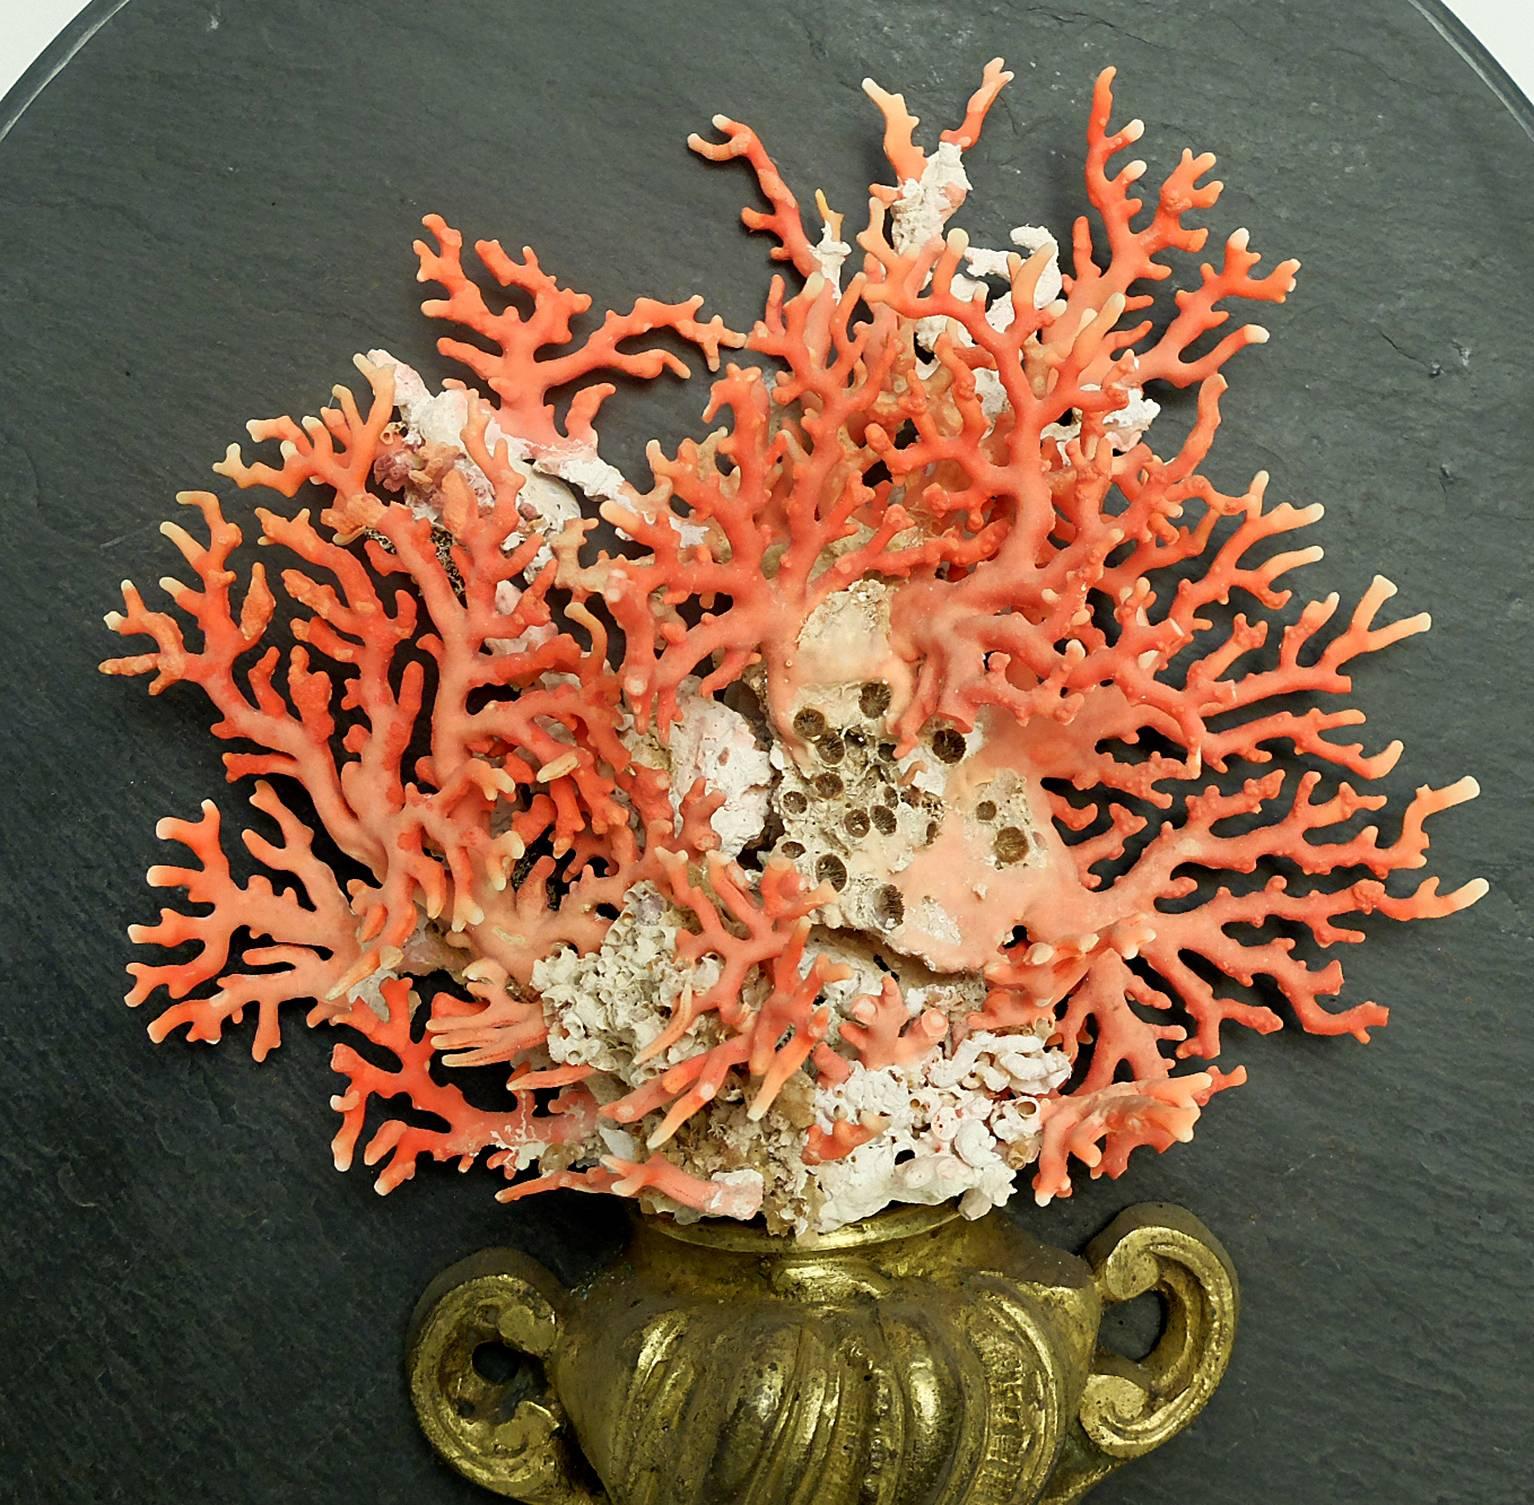 A Naturalia mineral specimen cut off branches of Mediterranean coral mounted on an early golden painted wooden and bronze 18th-century base depicting a vase. The coral sample fan shape is mounted over a slice of a slate of oval shape, Italy, circa